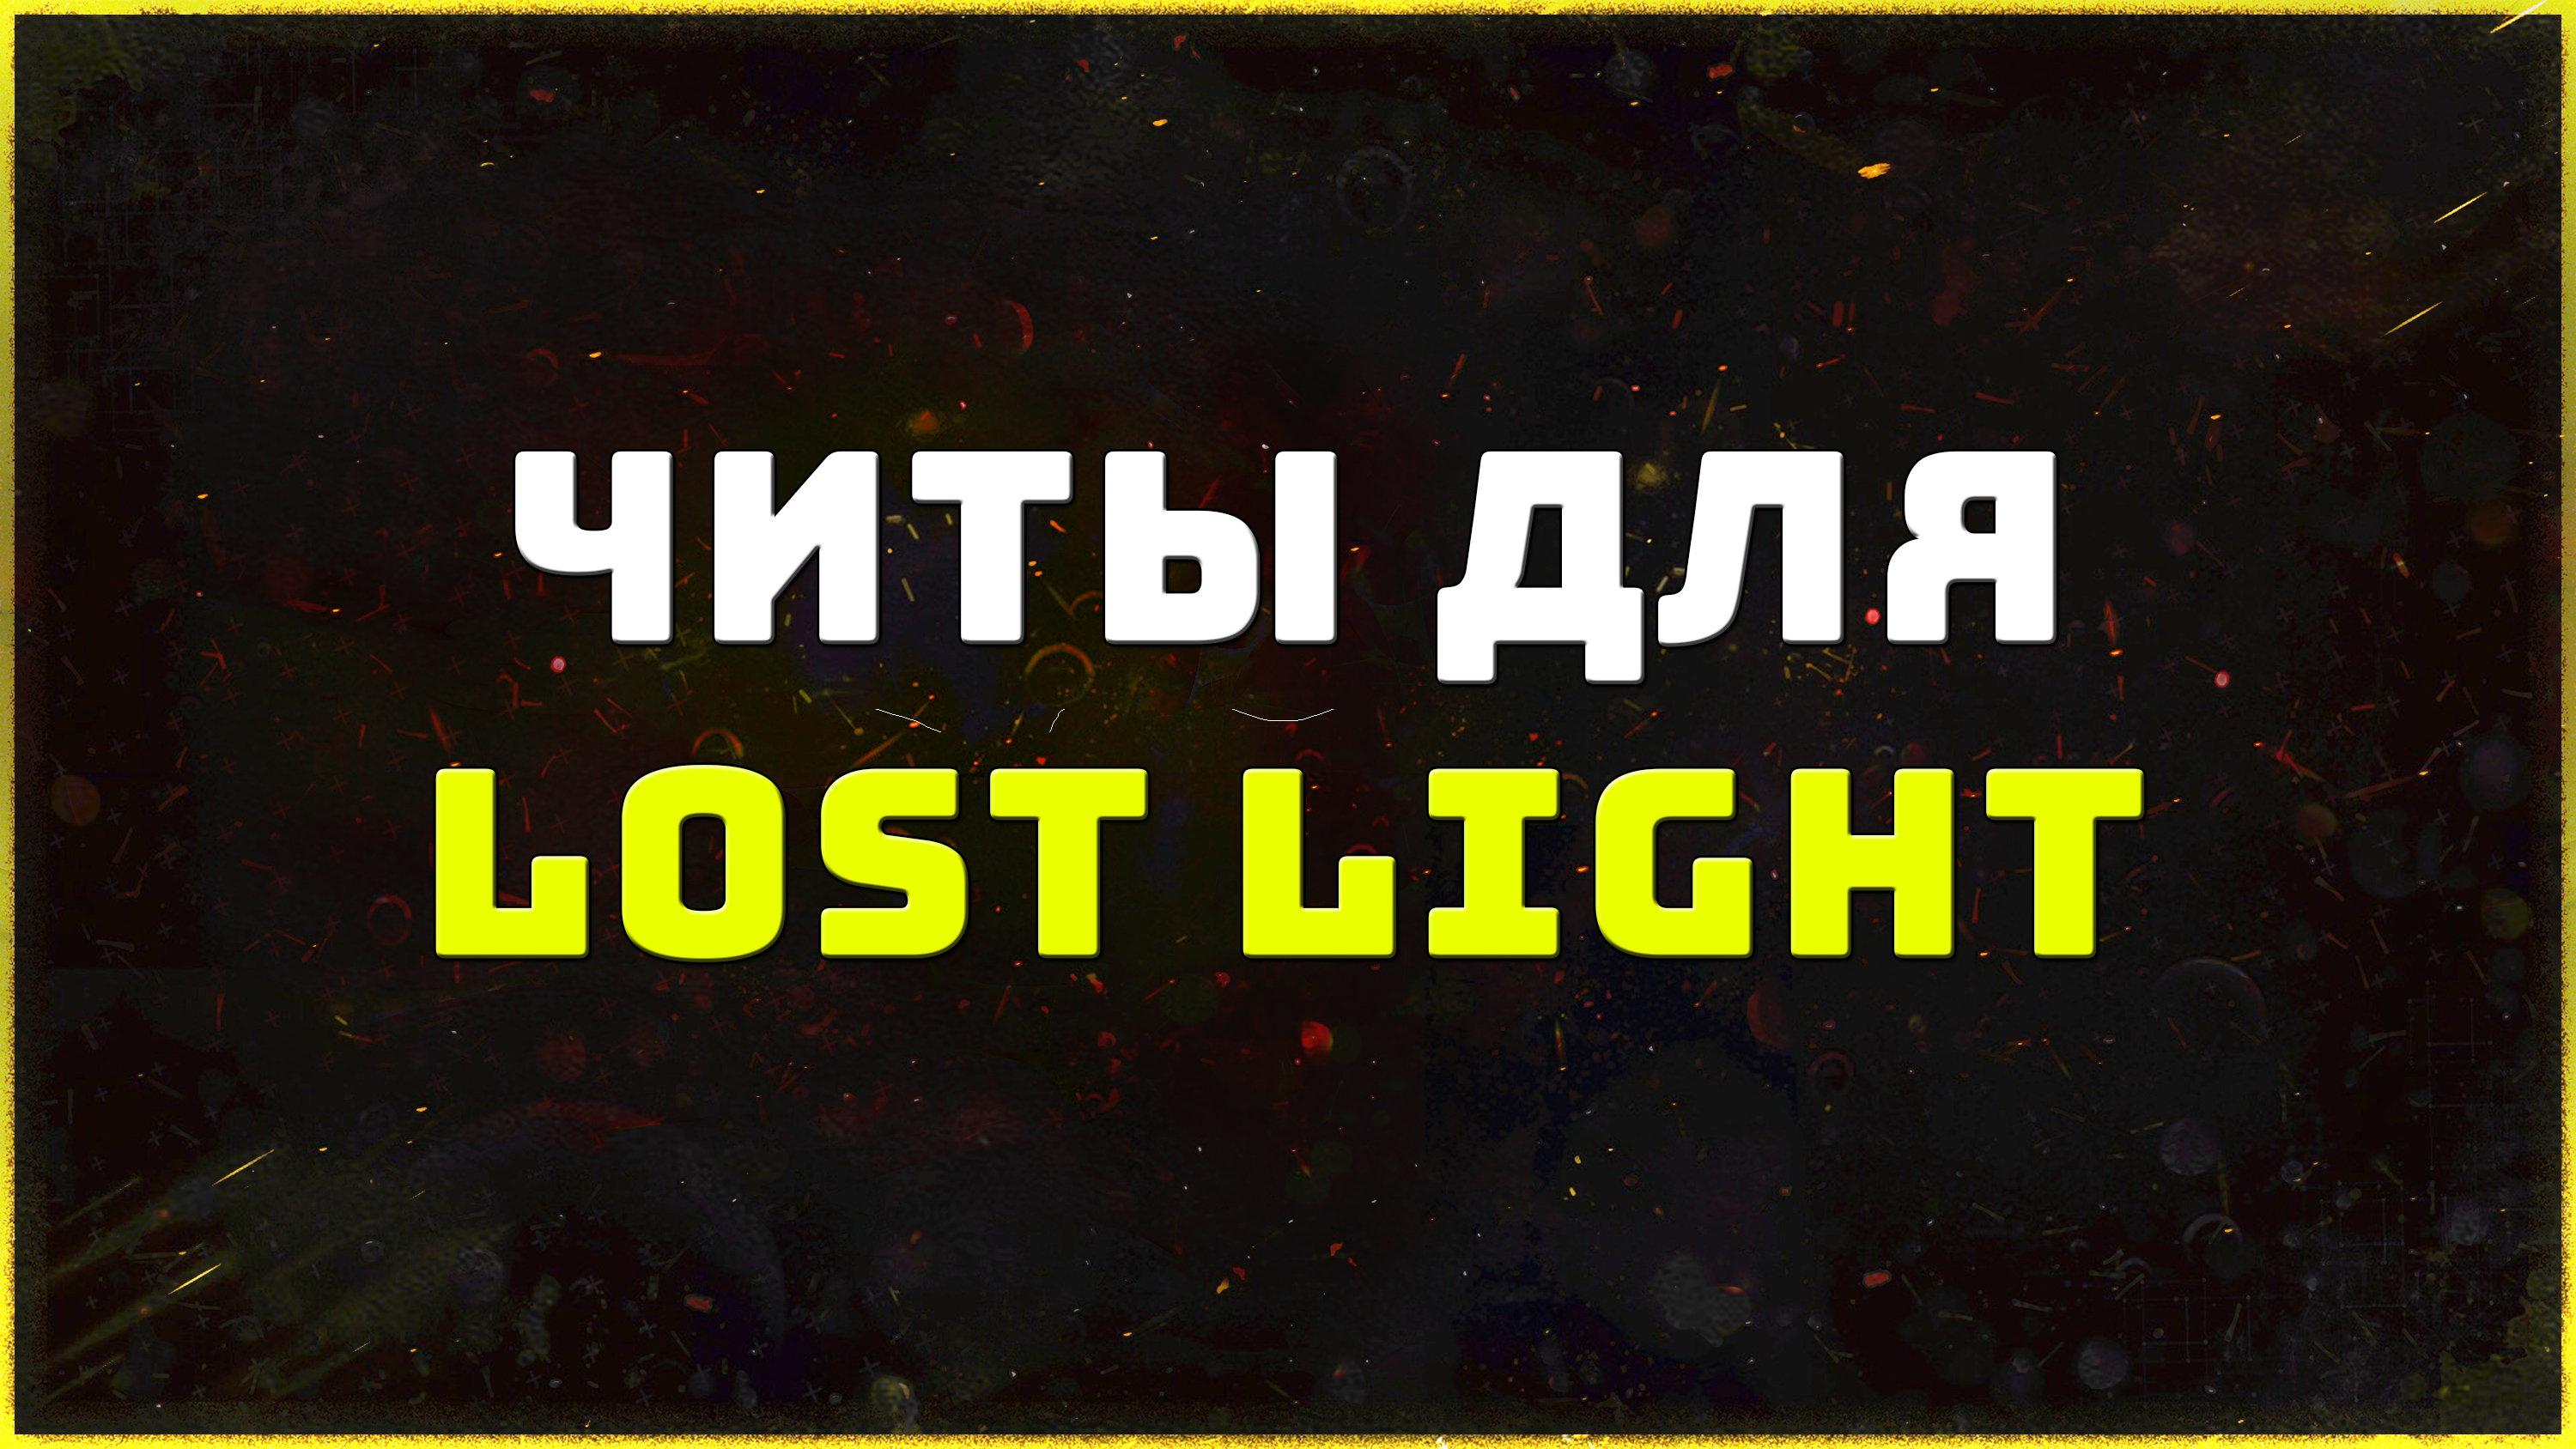 Private cheats for the game Lost Light